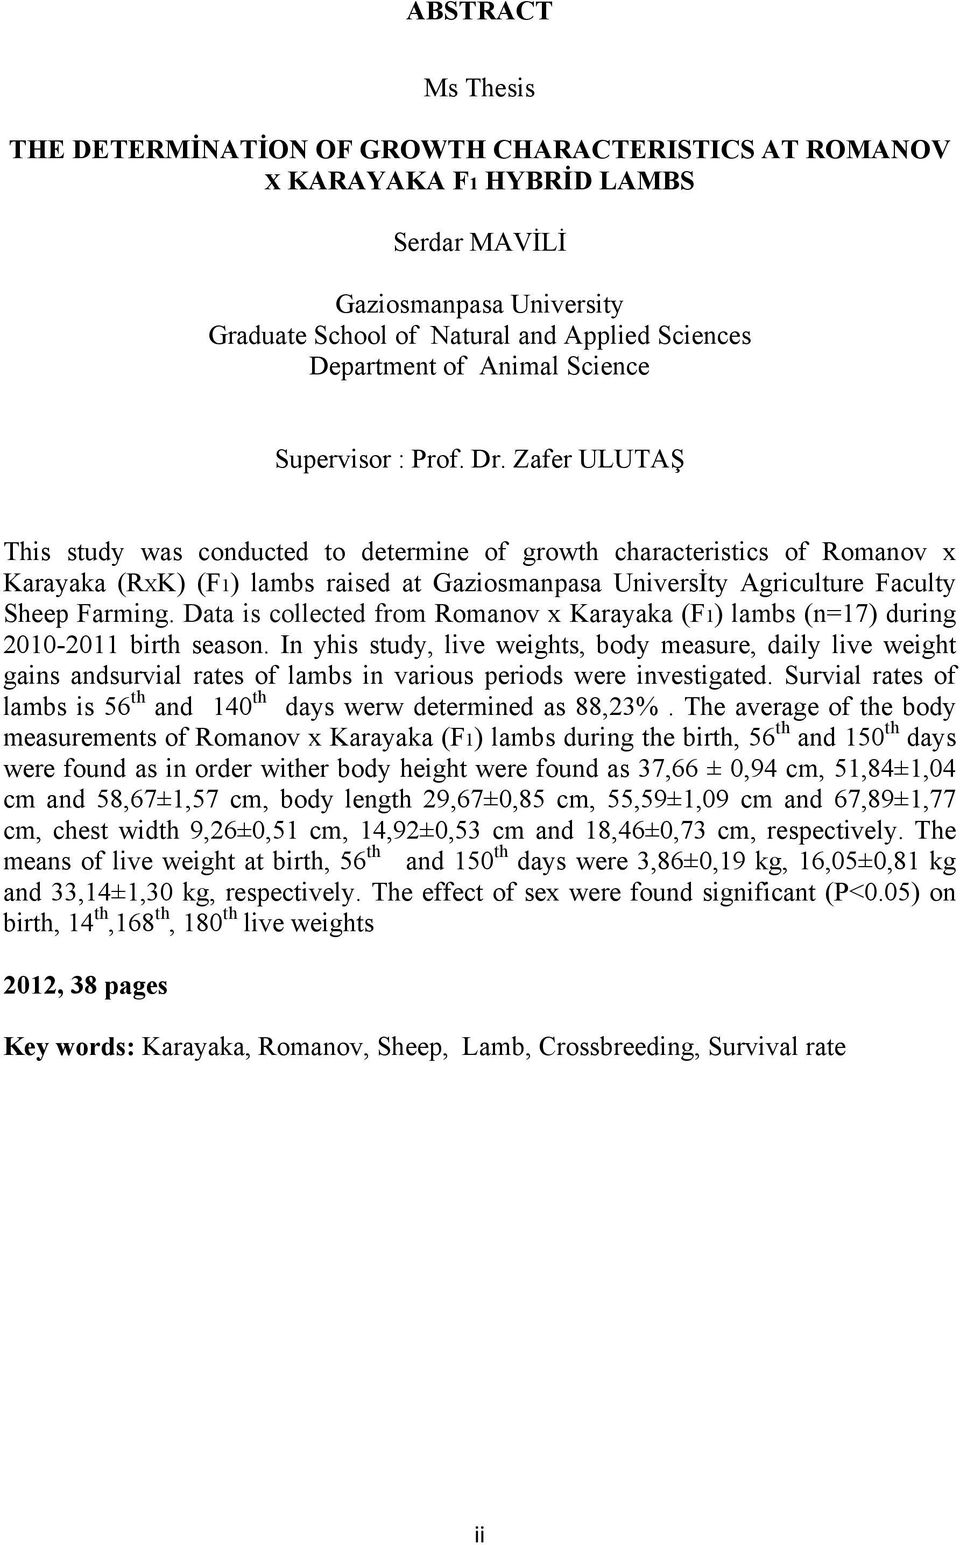 Zafer ULUTAŞ This study was conducted to determine of growth characteristics of Romanov x Karayaka (RXK) (F1) lambs raised at Gaziosmanpasa Universİty Agriculture Faculty Sheep Farming.